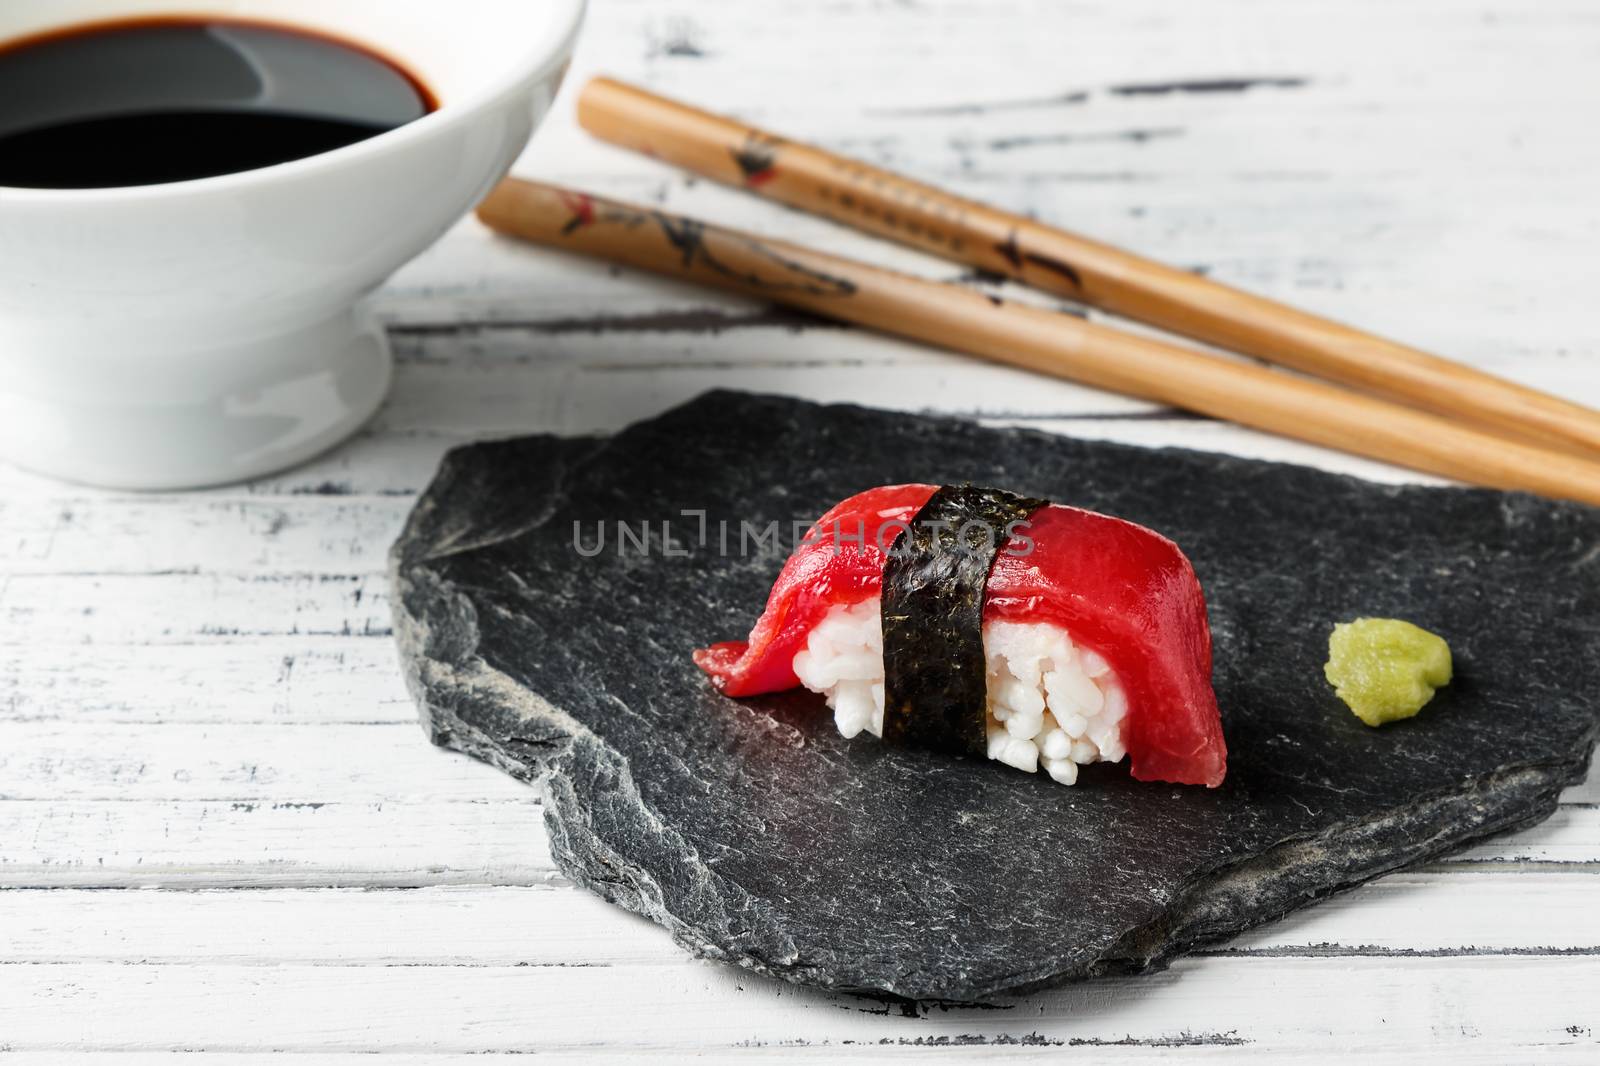 Red tuna Nigiri with Nori seaweed and wasabi paste on slate stone. Chopsticks and bowl with soy sauce in the background on old white wood. Raw fish in traditional Japanese sushi style. Horizontal image.